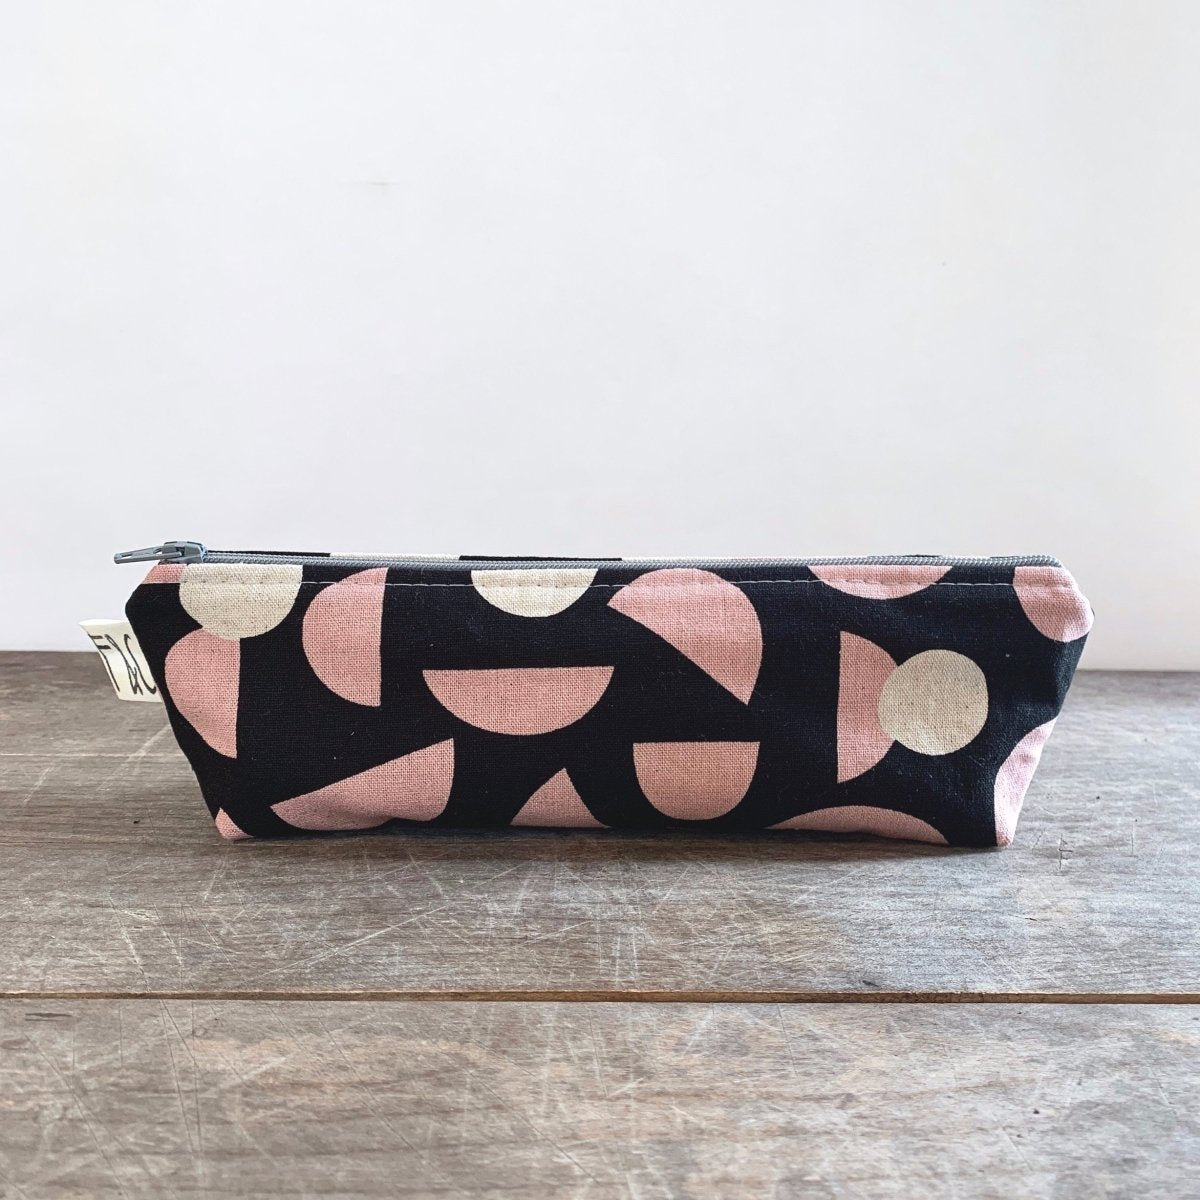 Narrow black canvas pencil case with pink and cream colored concentric shapes. Designed and handmade by Frankie & Coco in Portland, Oregon.